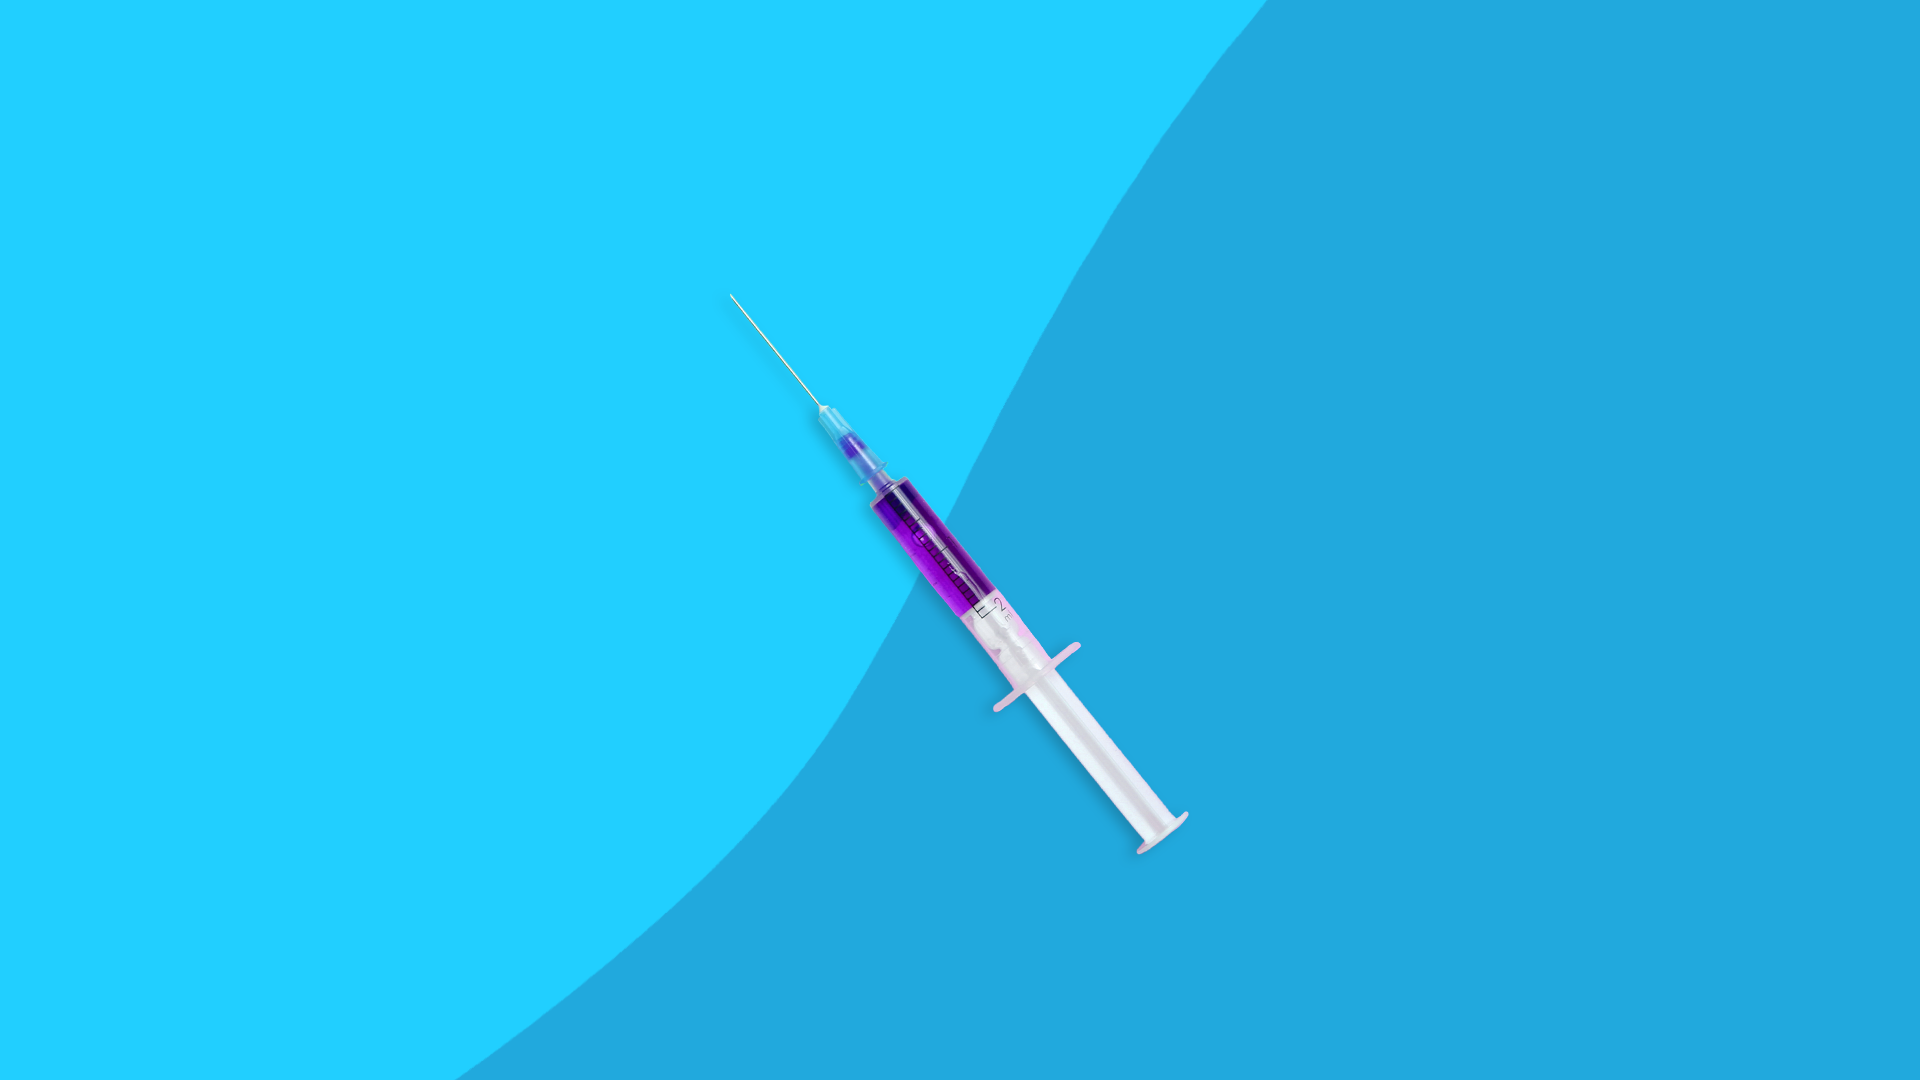 Syringe filled with injectable medication: Lantus side effects to expect